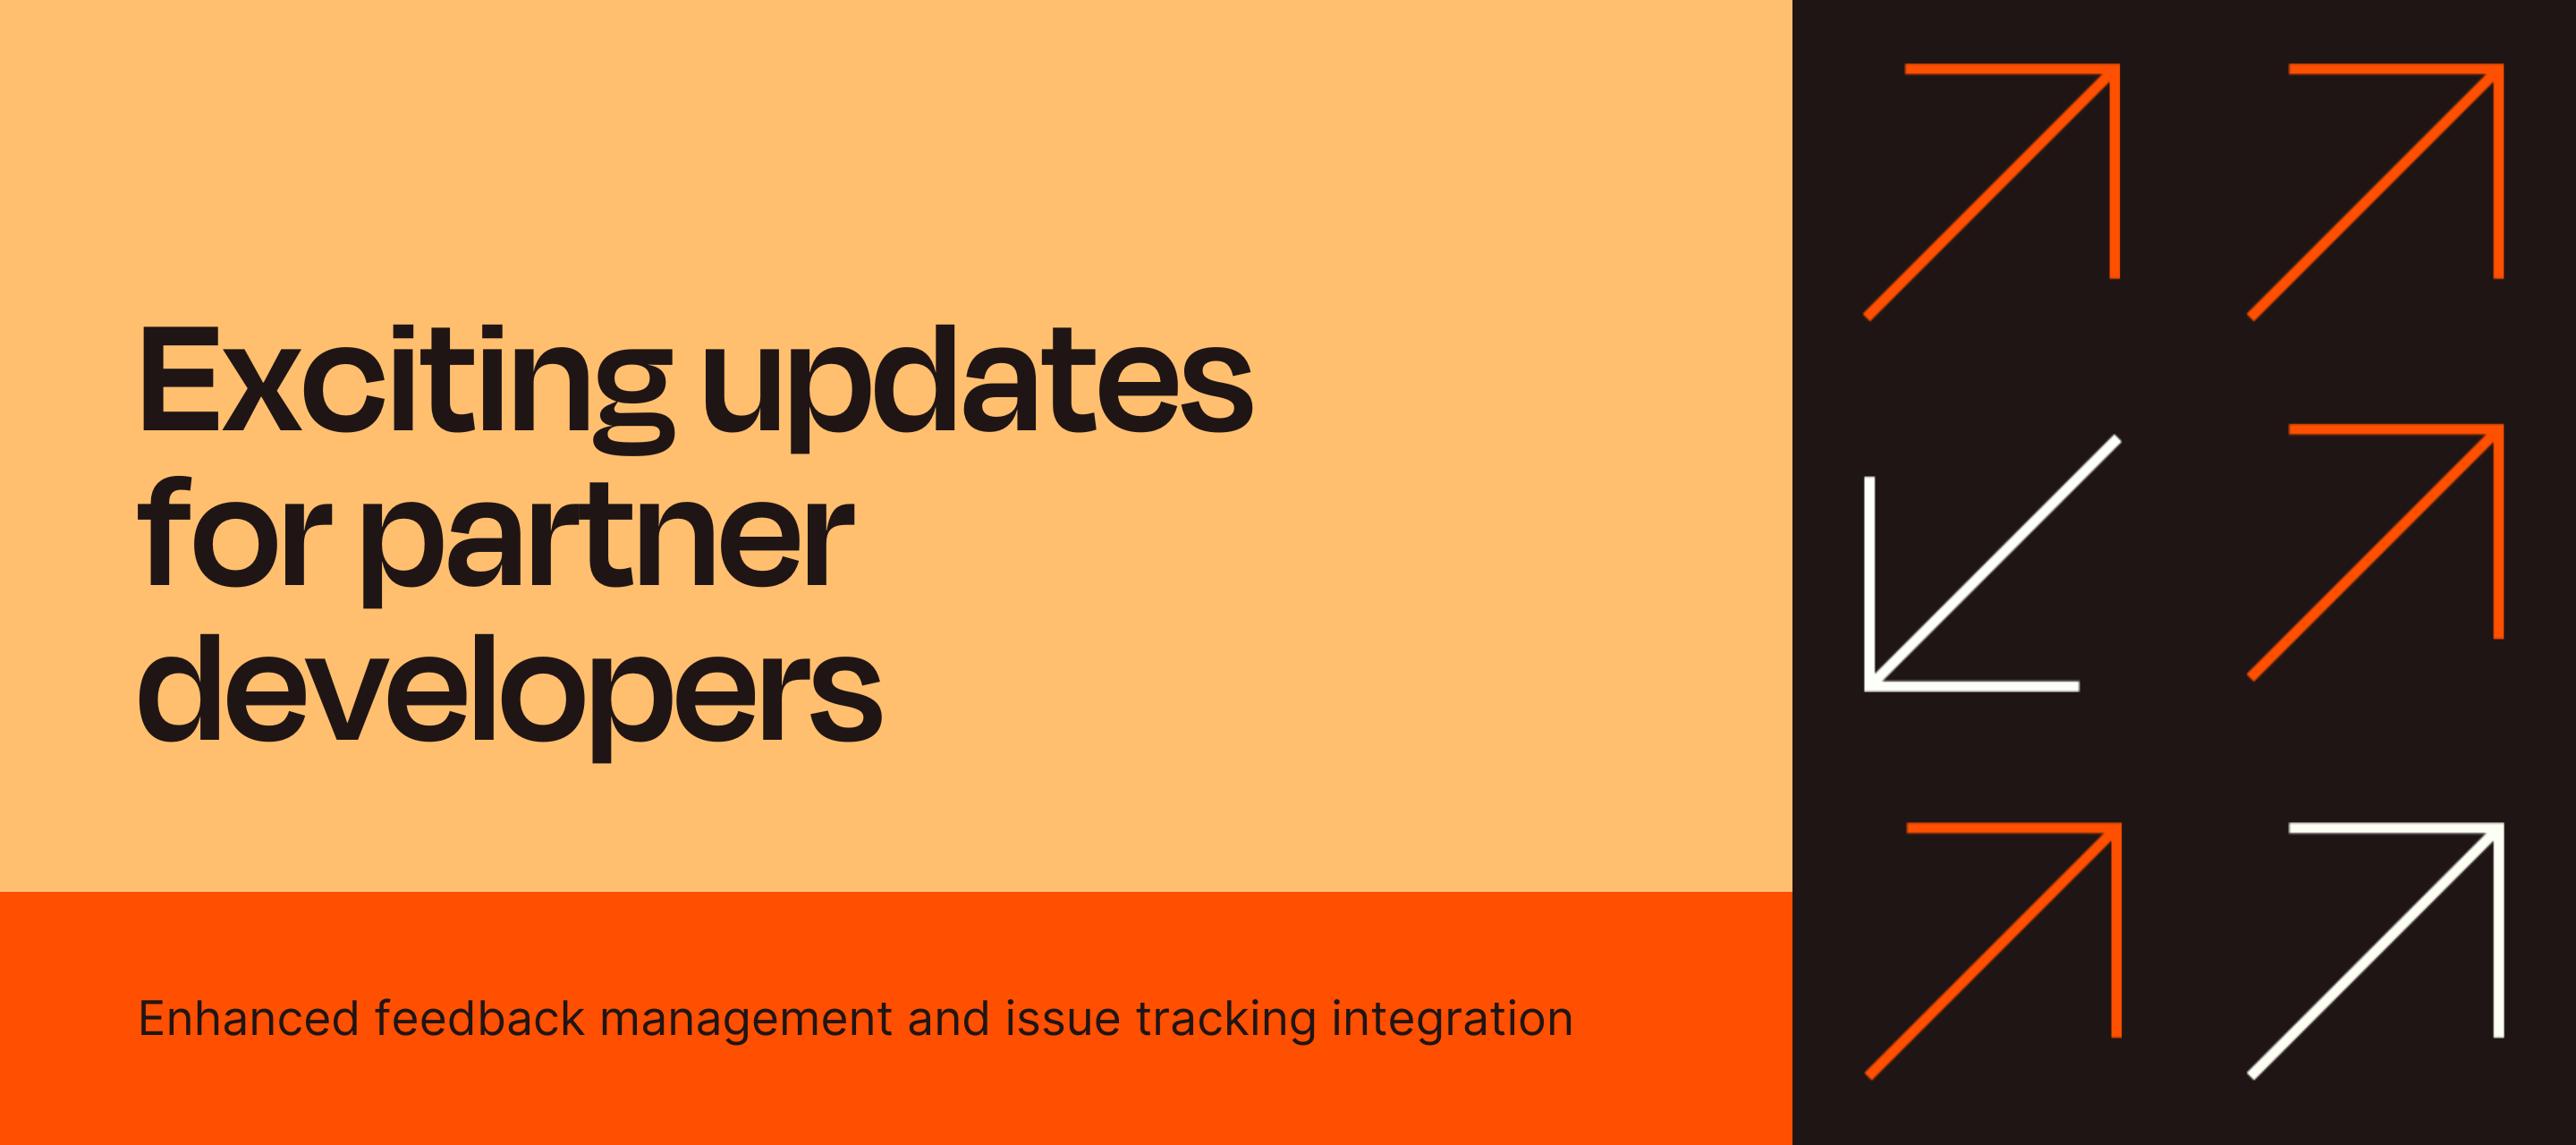 New in the Developer Platform: Enhanced Feedback Management and Issue Tracking Integration